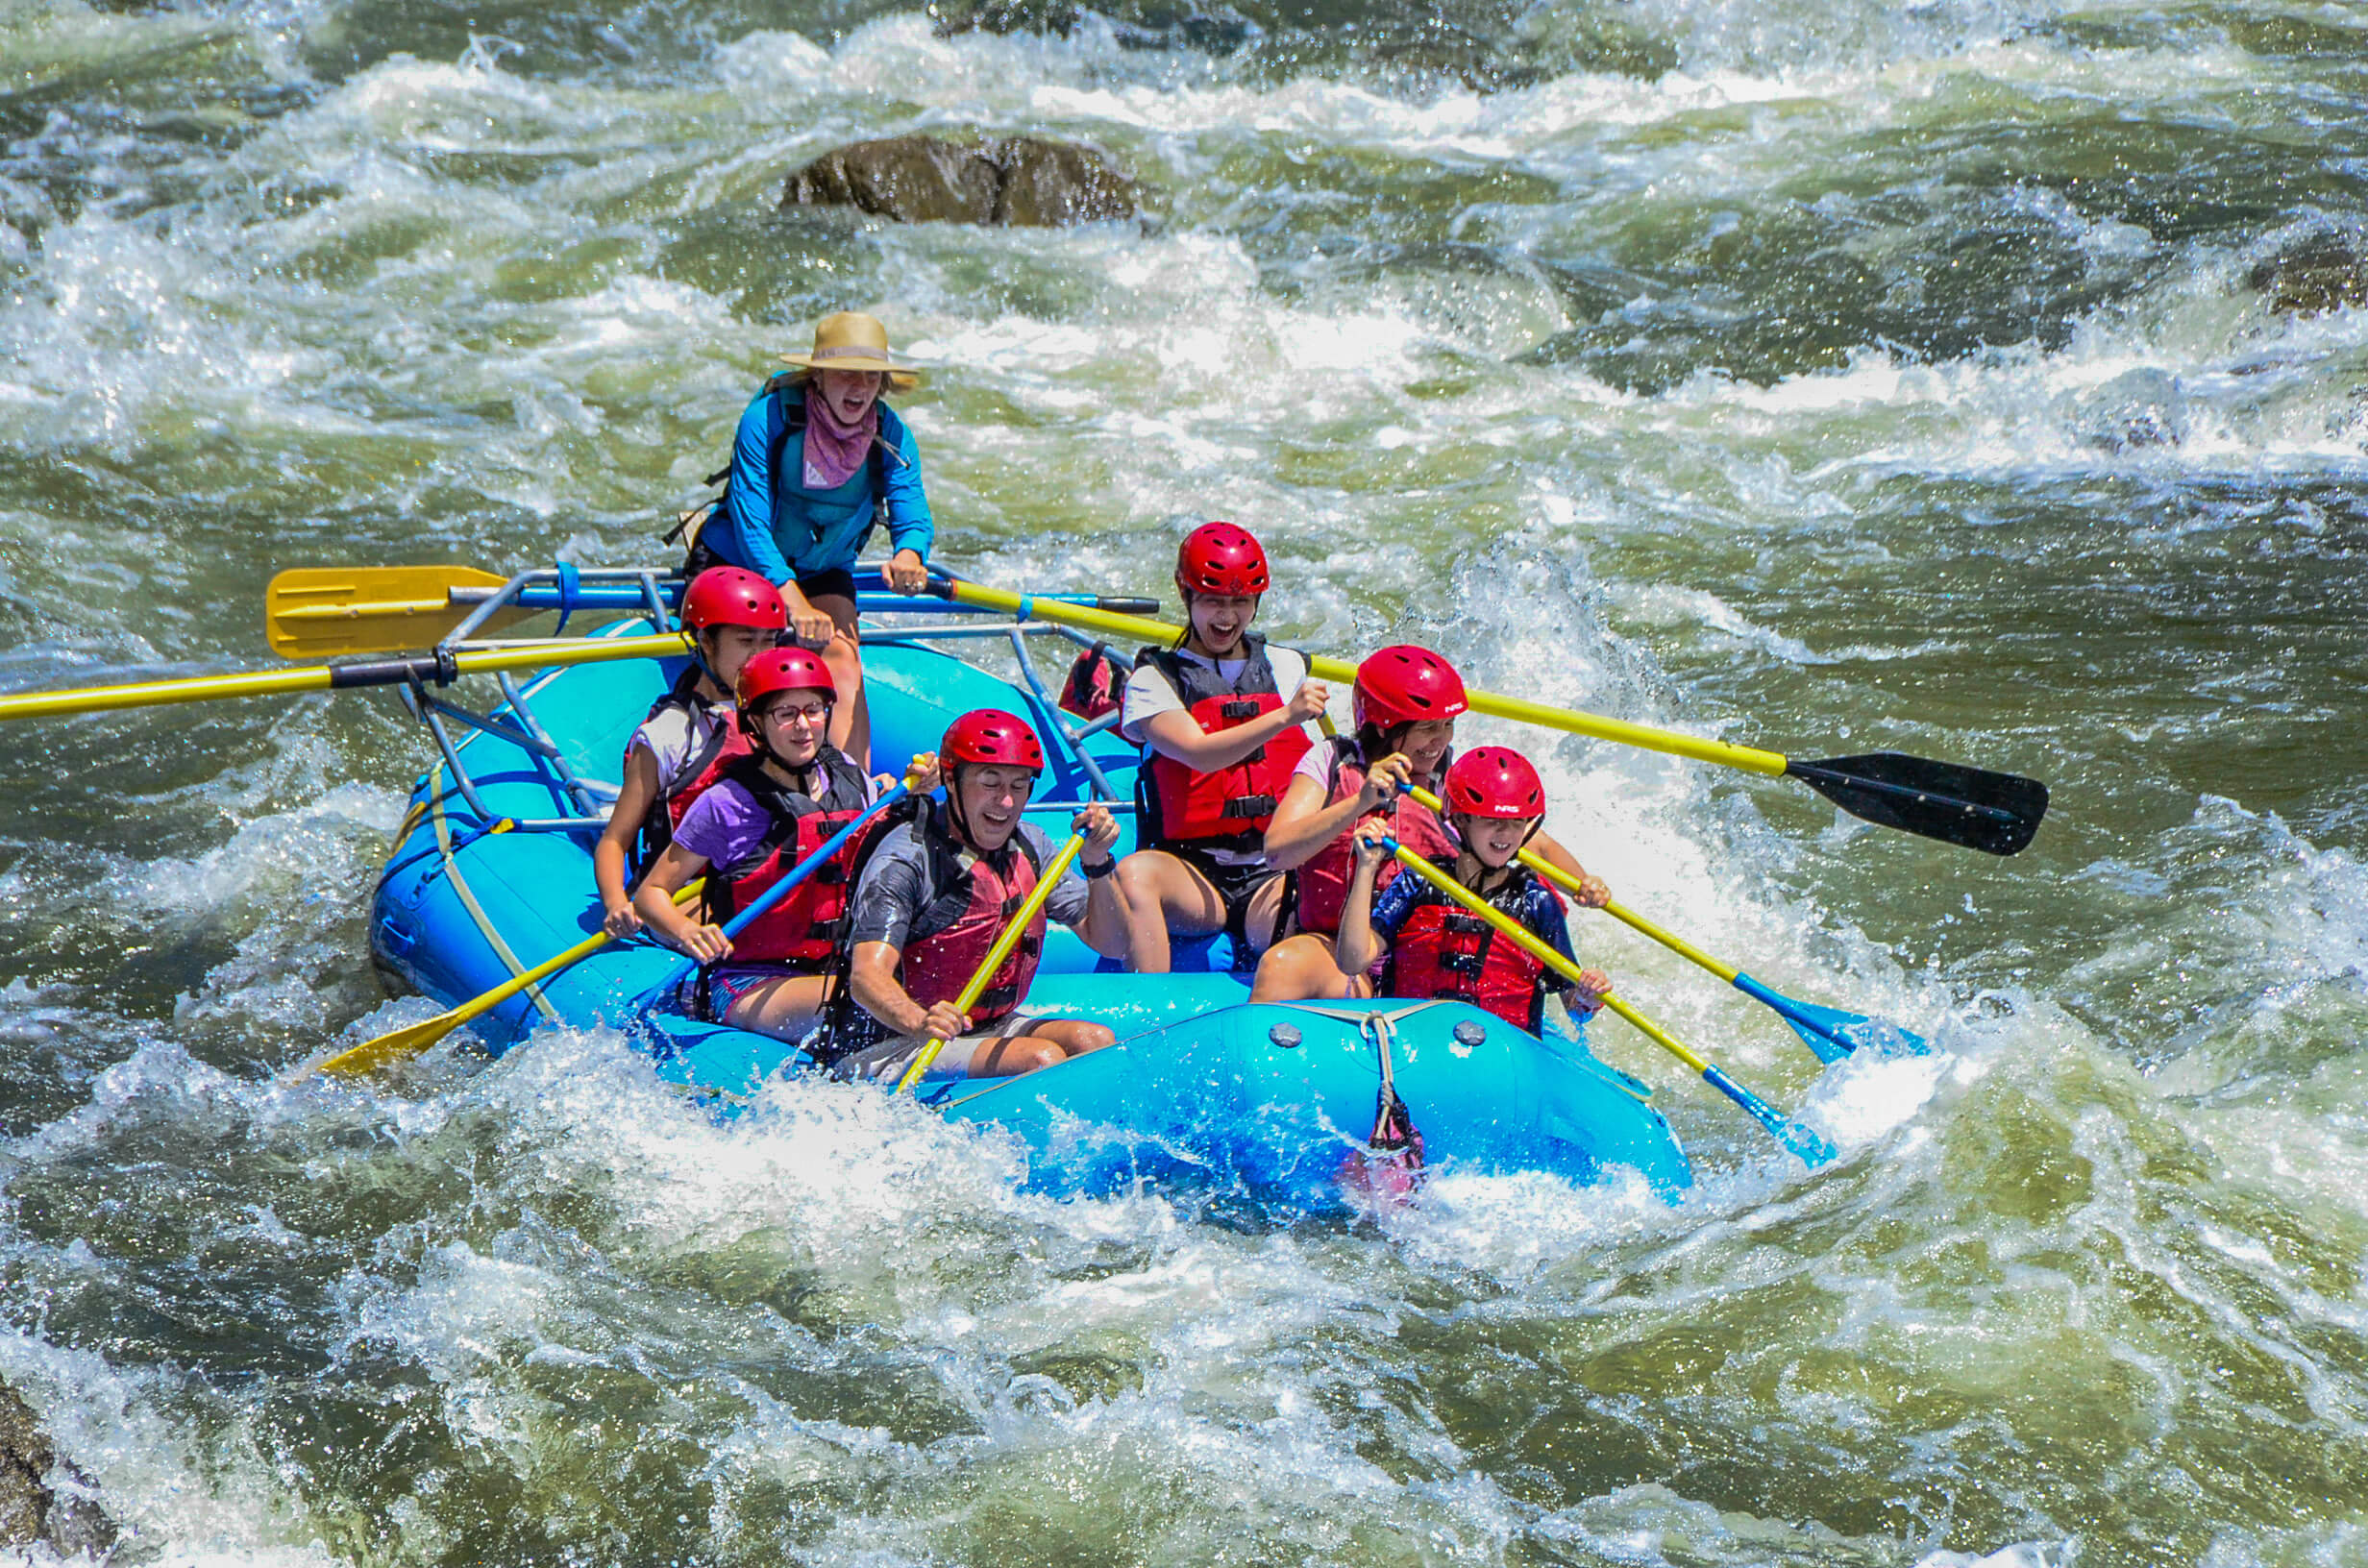 An image of a boat of rafters and their guide paddling through whitewater rapids on the Colorado River.